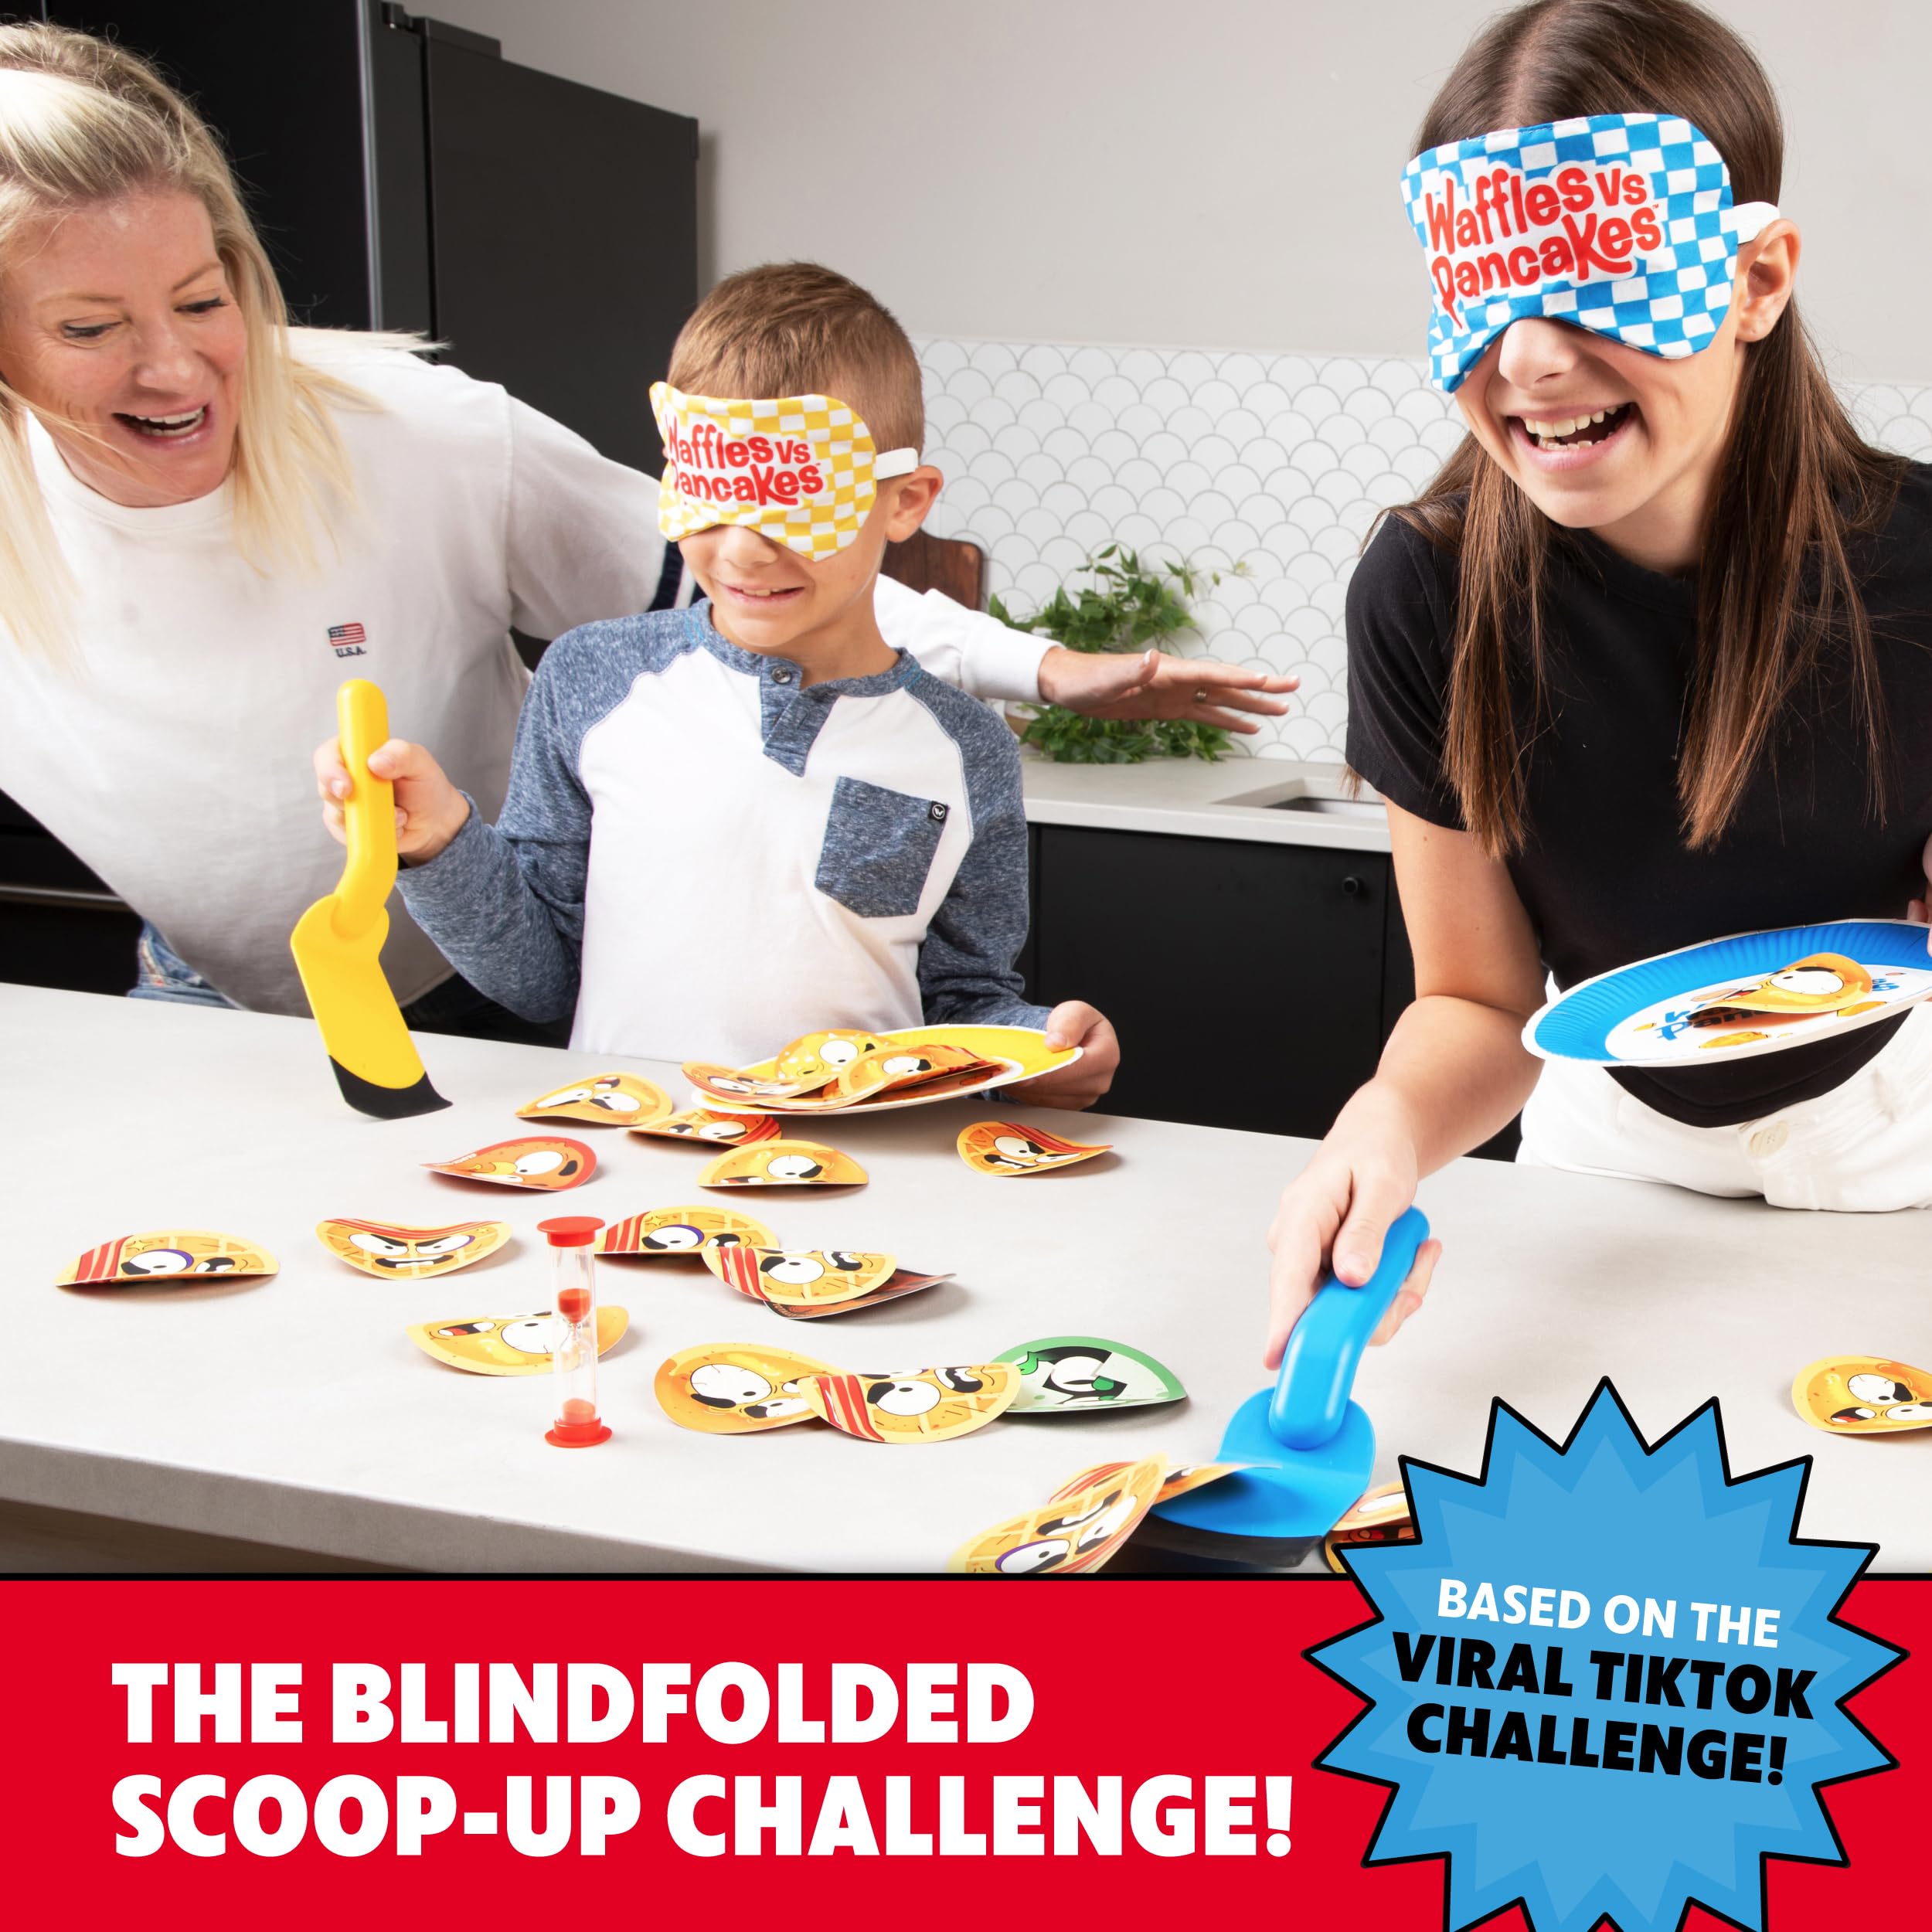 WHAT DO YOU MEME? Waffles vs Pancakes - The Pancake Pile Up Game - Games for Family Game Night